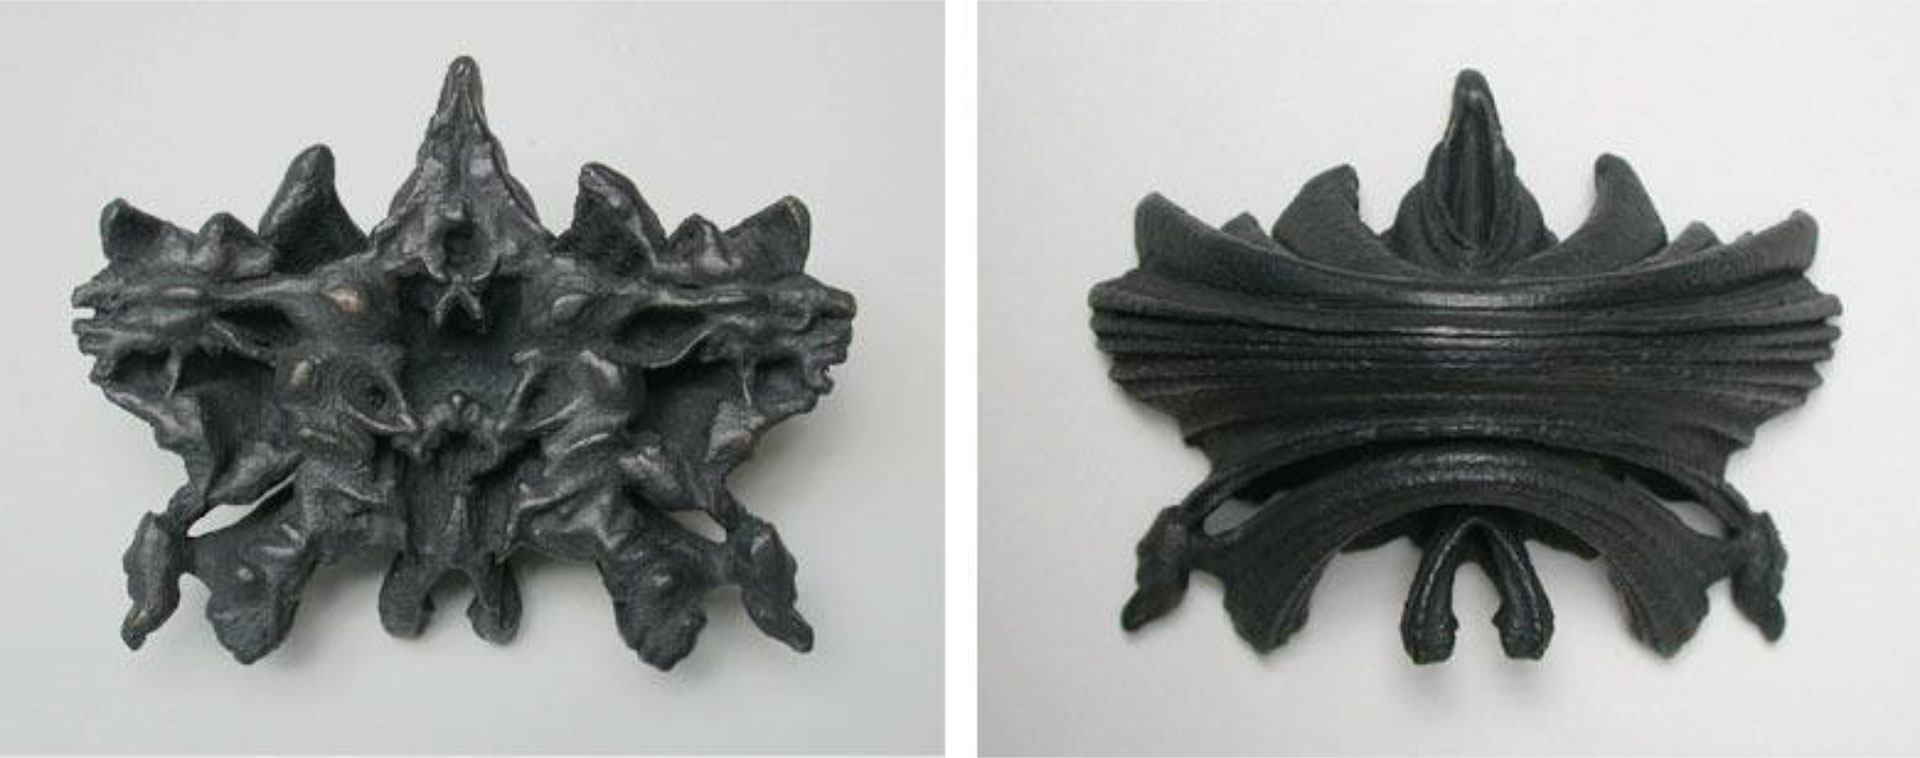 Suzanne Anker, Rorschach series (Spider), 2004-05. Bronze, Edition of 3. 4.5” x 3.5” x 1.75”. $4,000. Also available in 4.5” x 5” x 1”. Plaster and resin; ivory white or painted black, Edition of 6. $500.